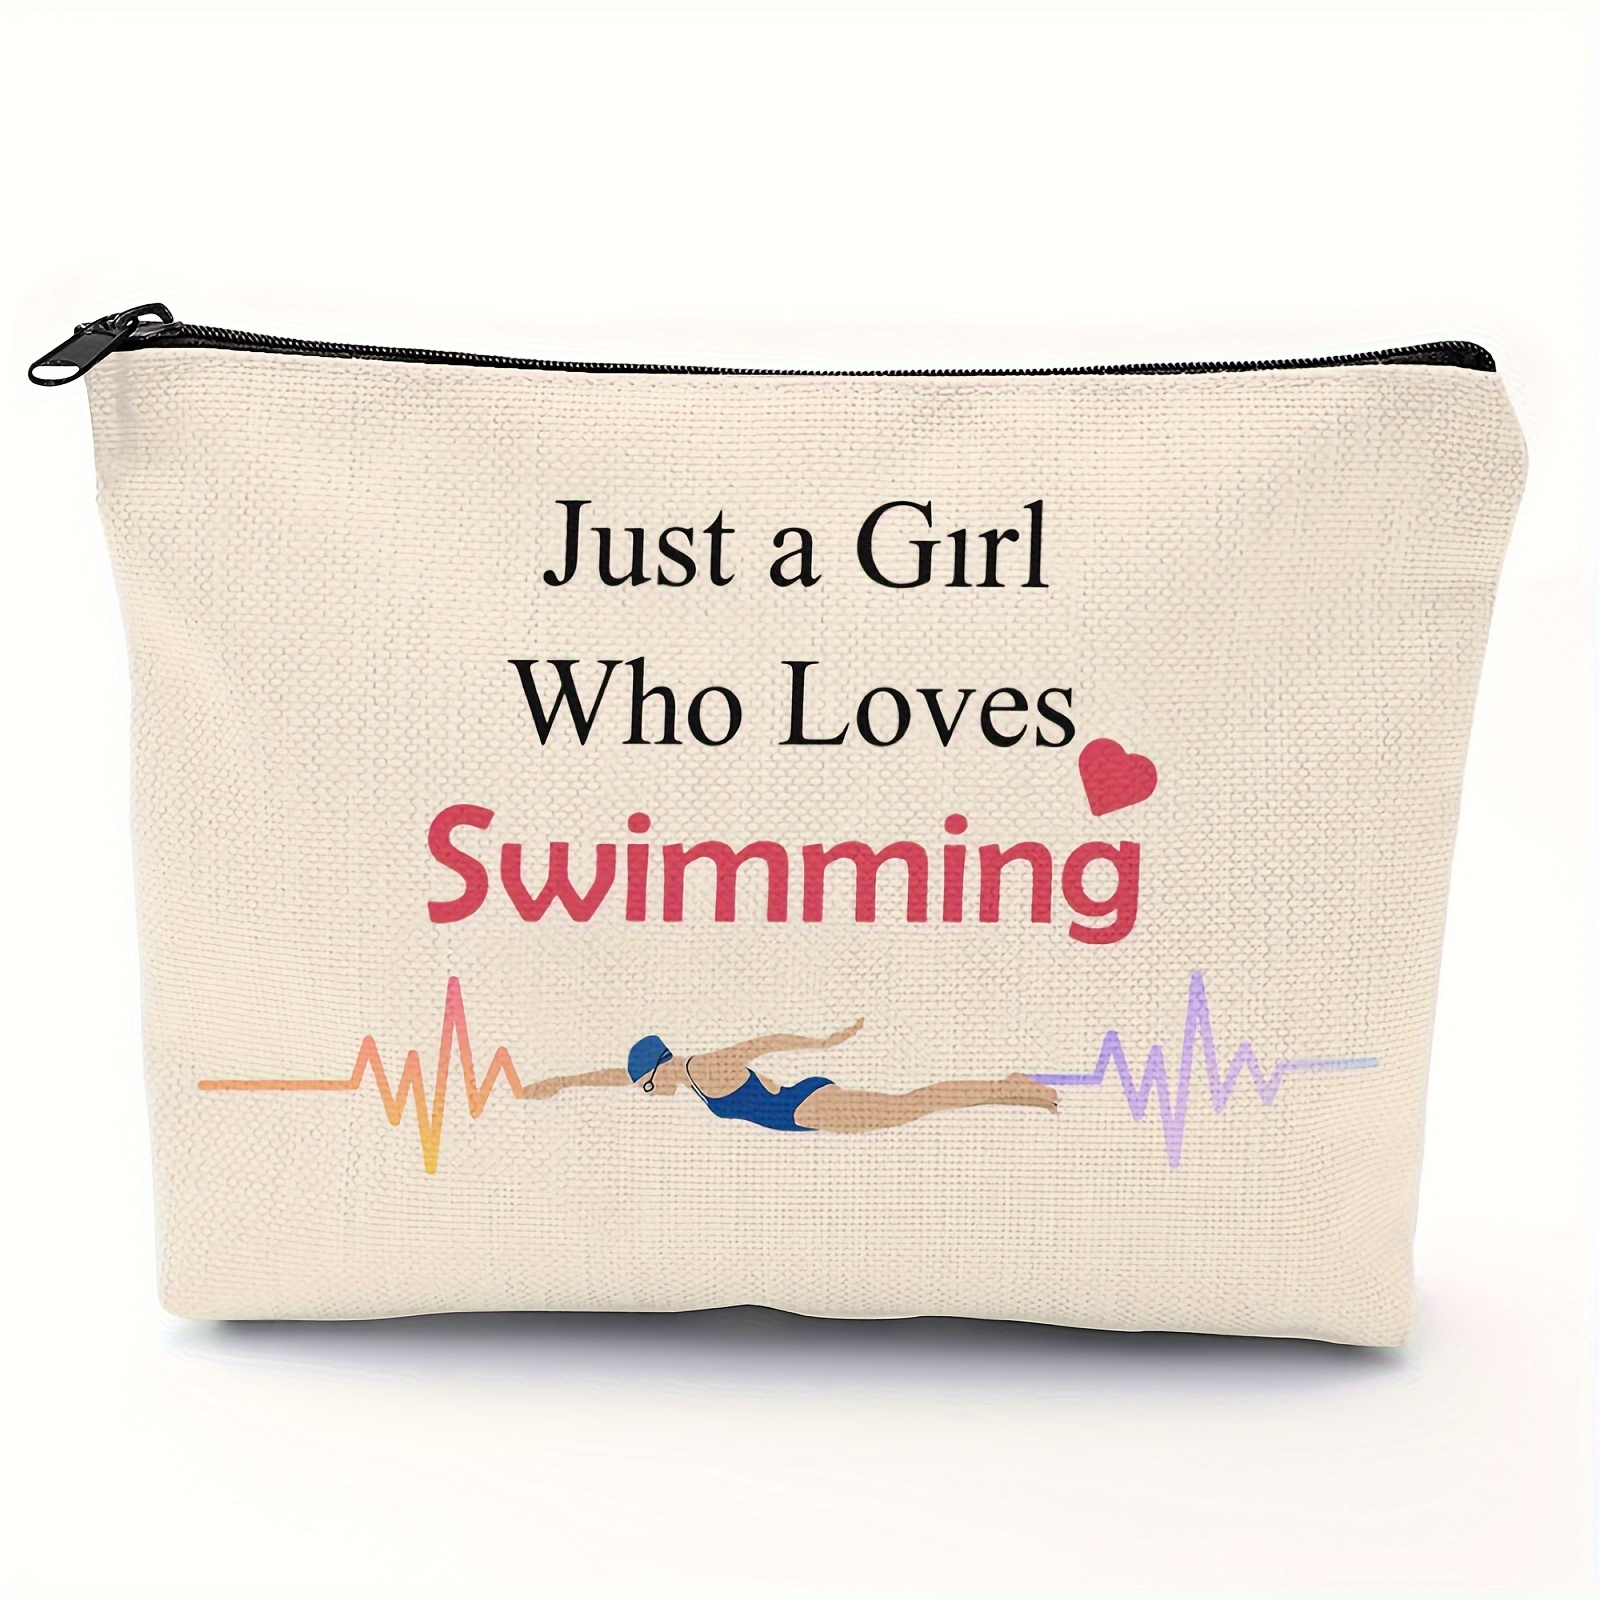 

Swimmer Gifts Swim Lover Gifts, Cartoon Letter Print Cosmetic Bag, Portable Zipper Makeup Storage Bag, Clutch Travel Toiletry Organizer Bag